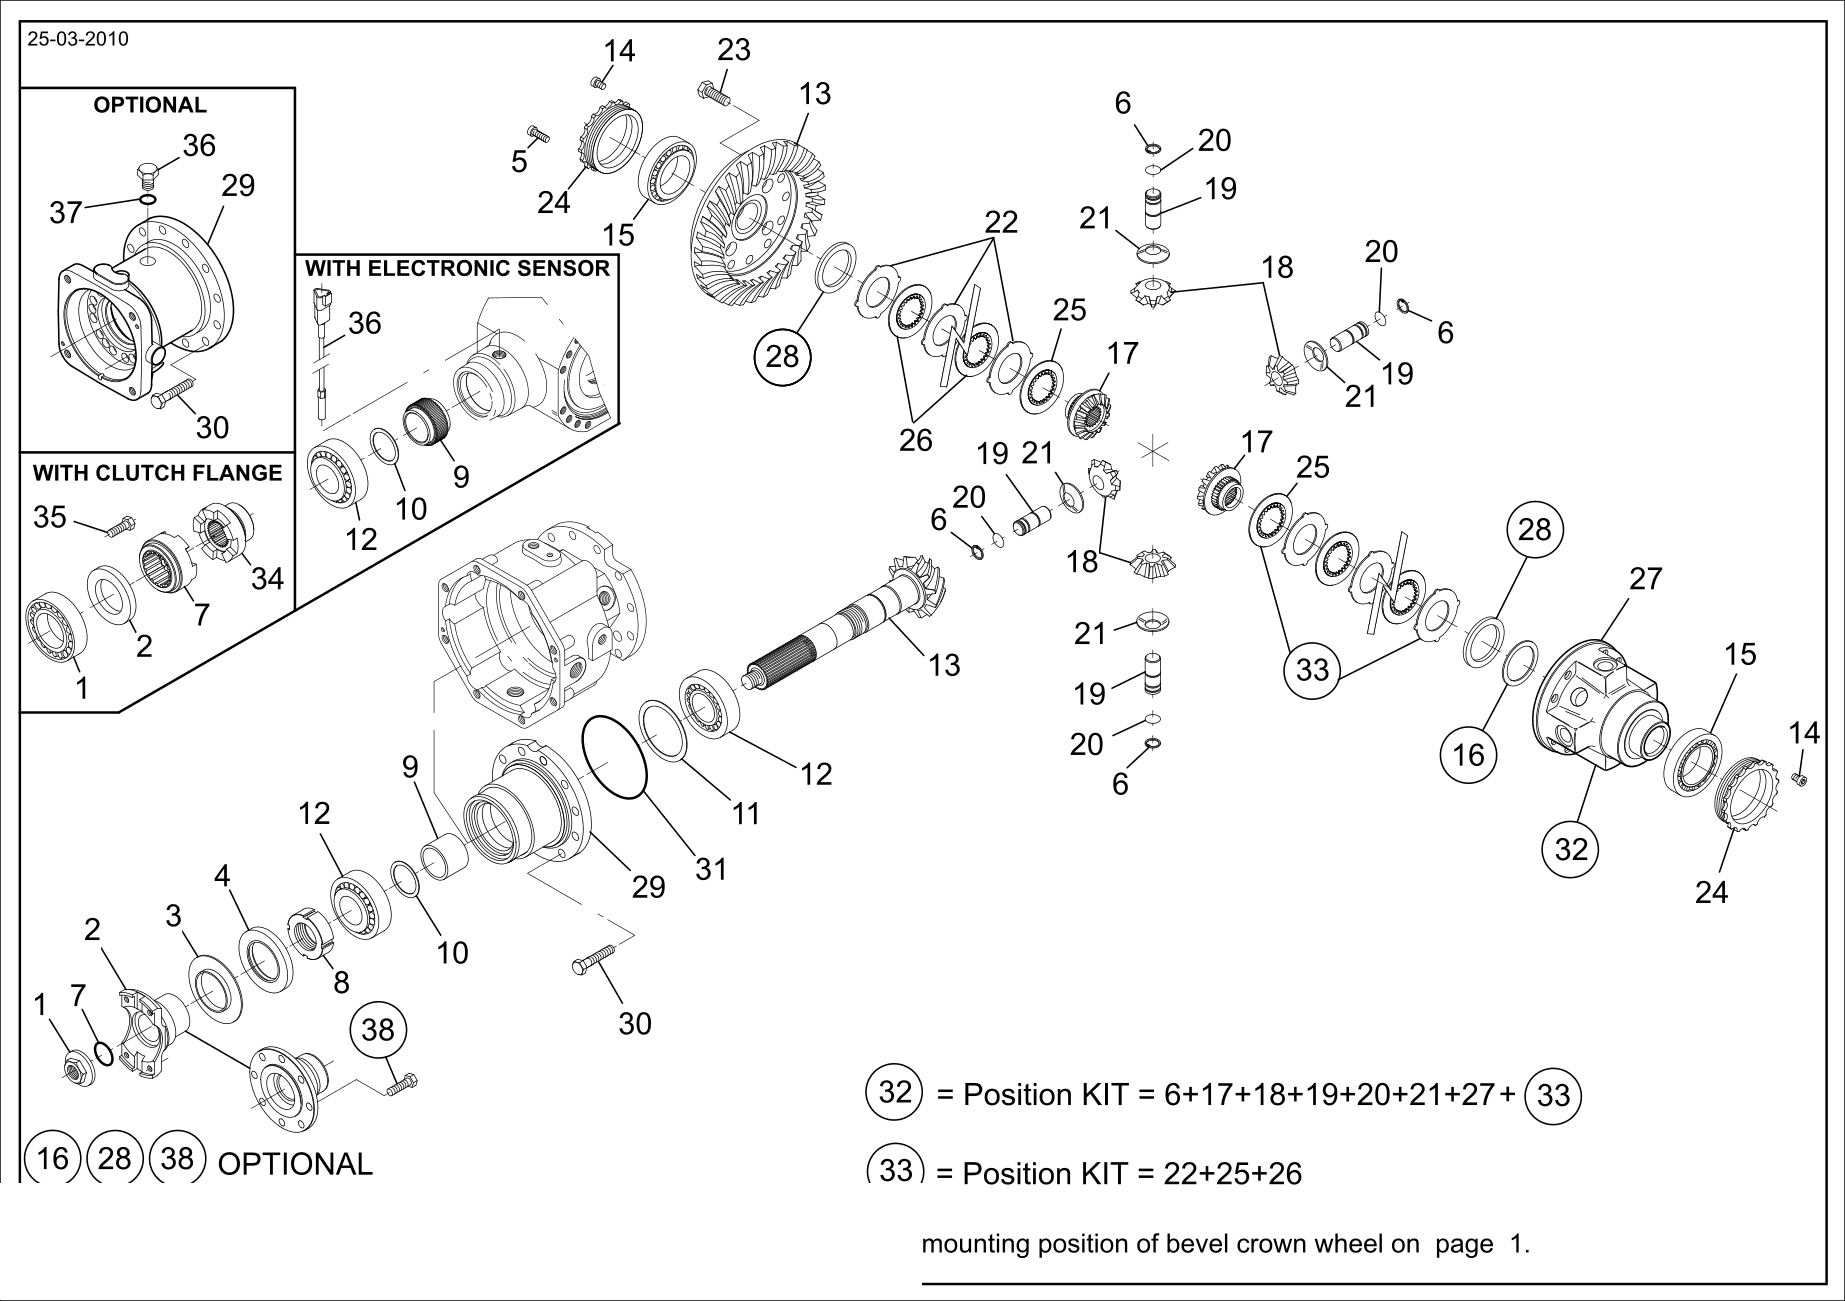 drawing for BRODERSON MANUFACTURING 0-055-00189 - SHIM (figure 3)